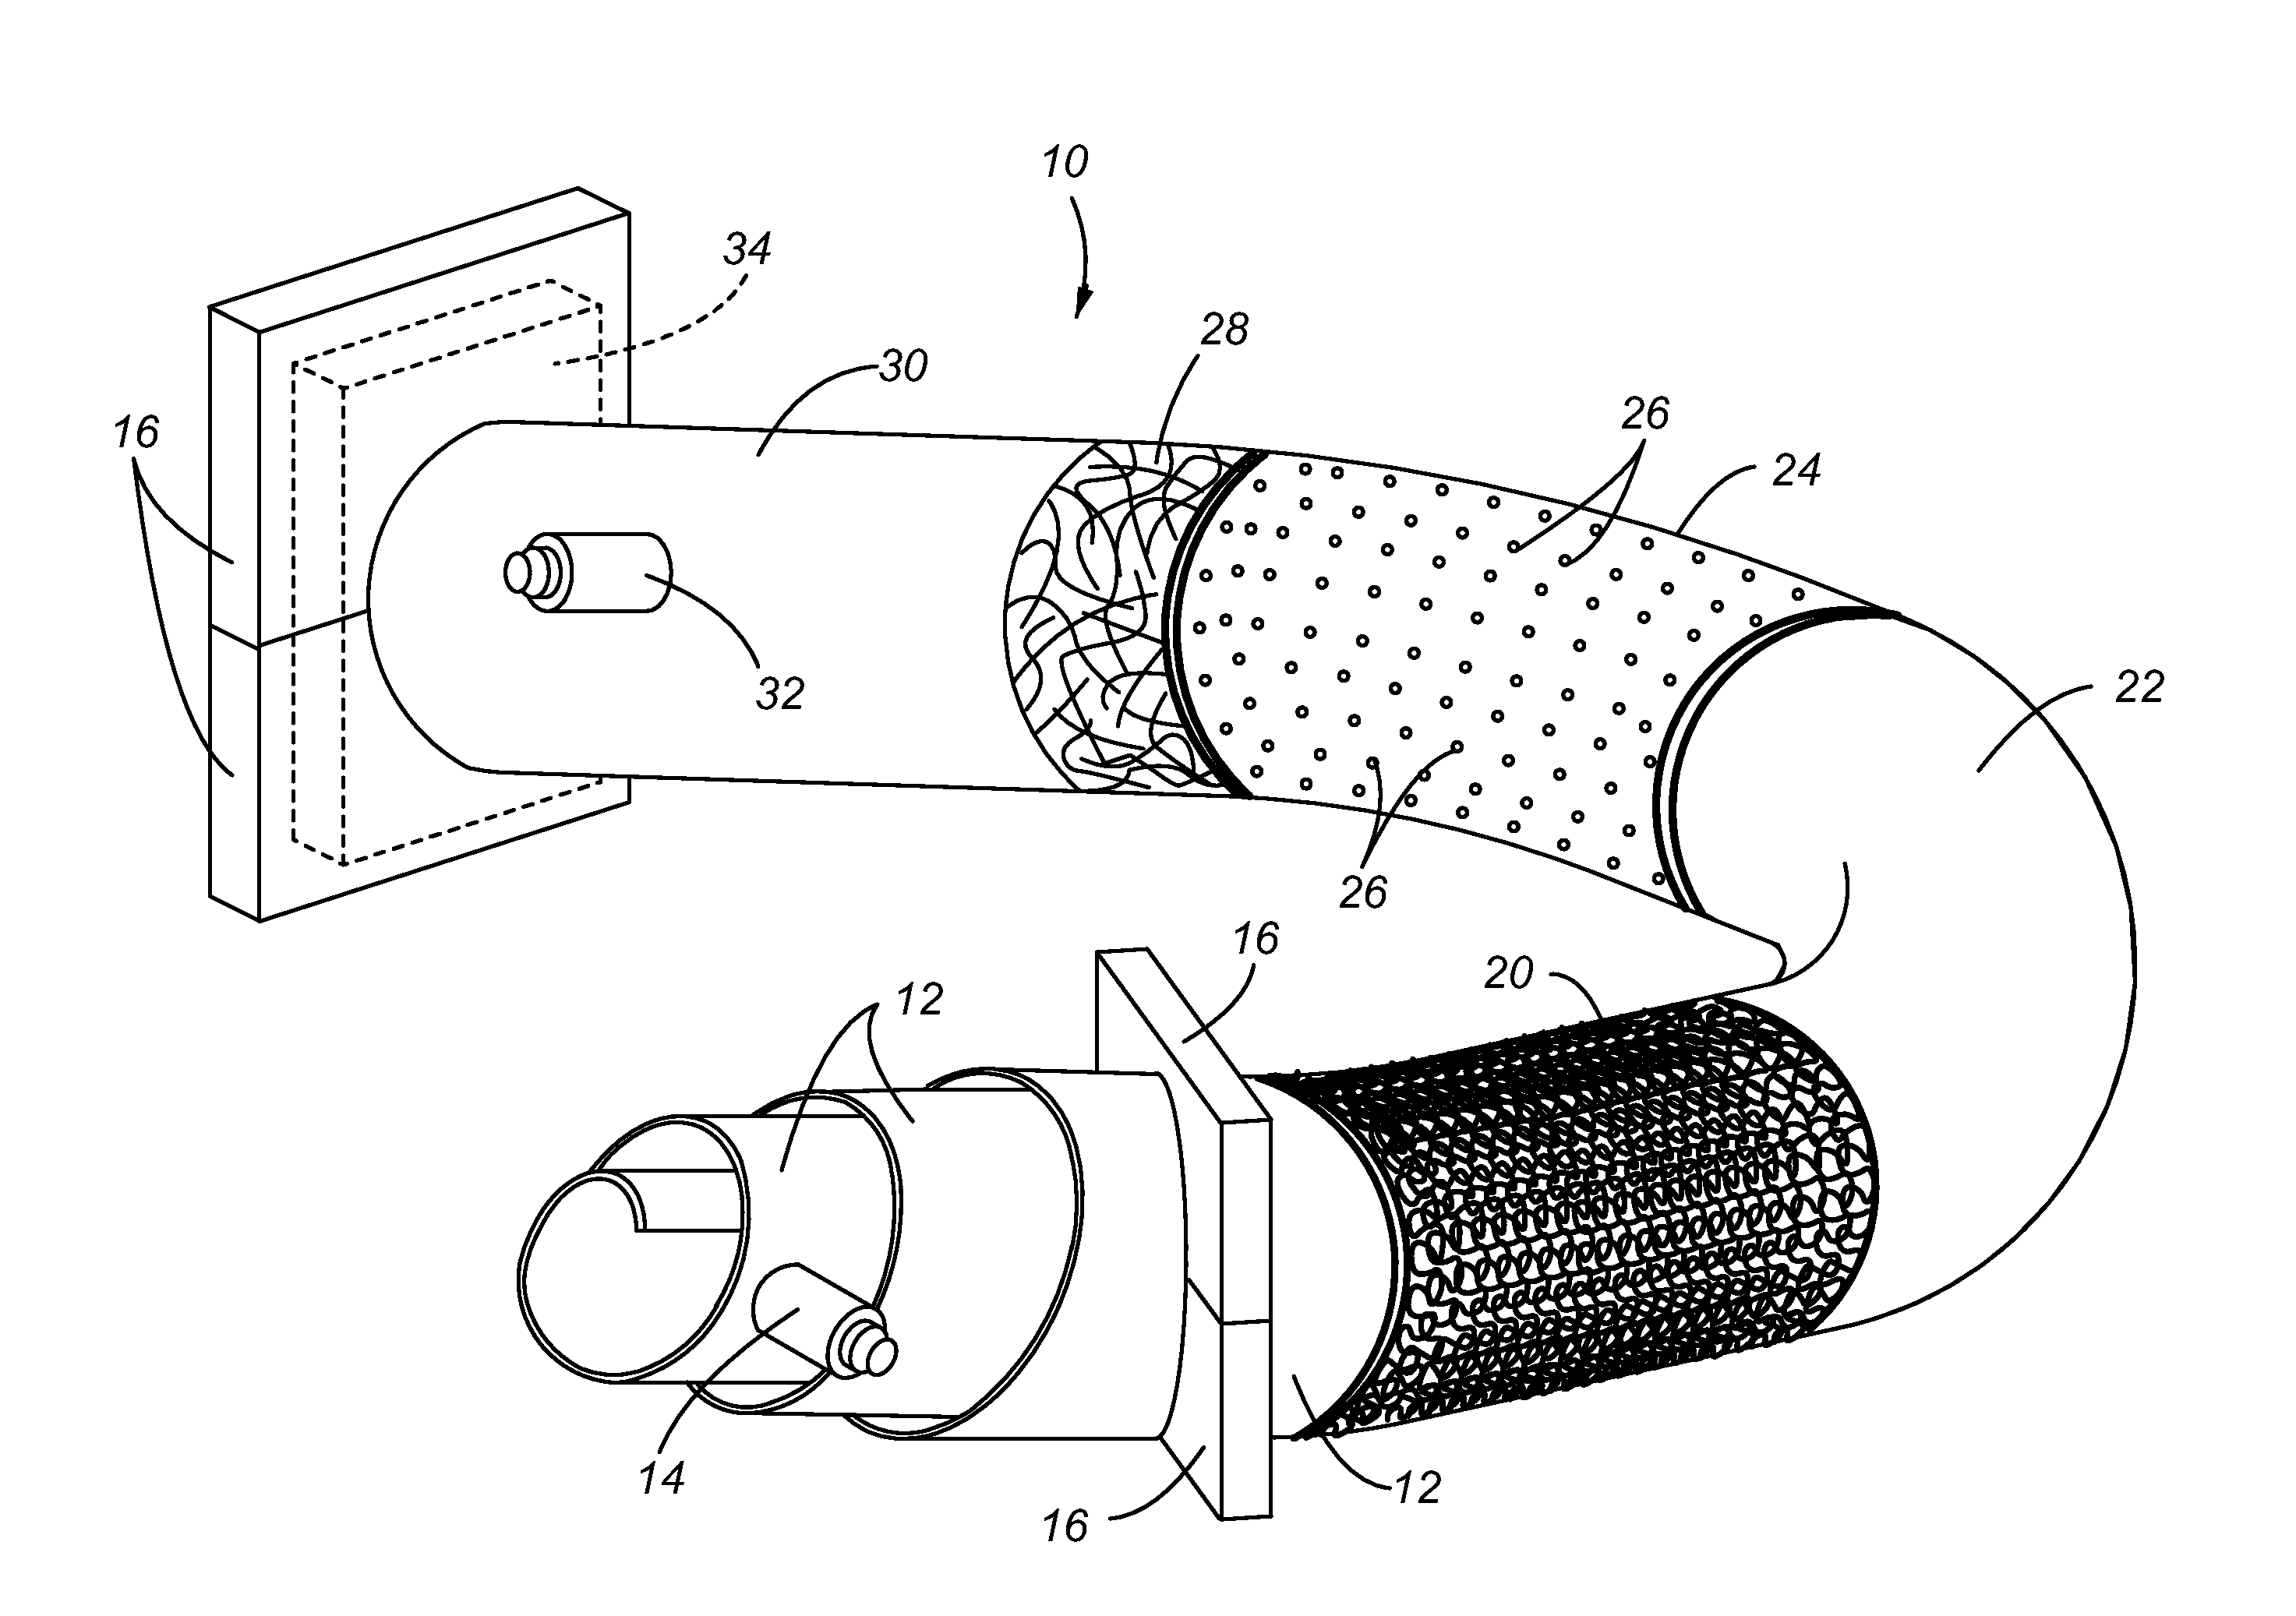 Composite tube for fluid delivery system